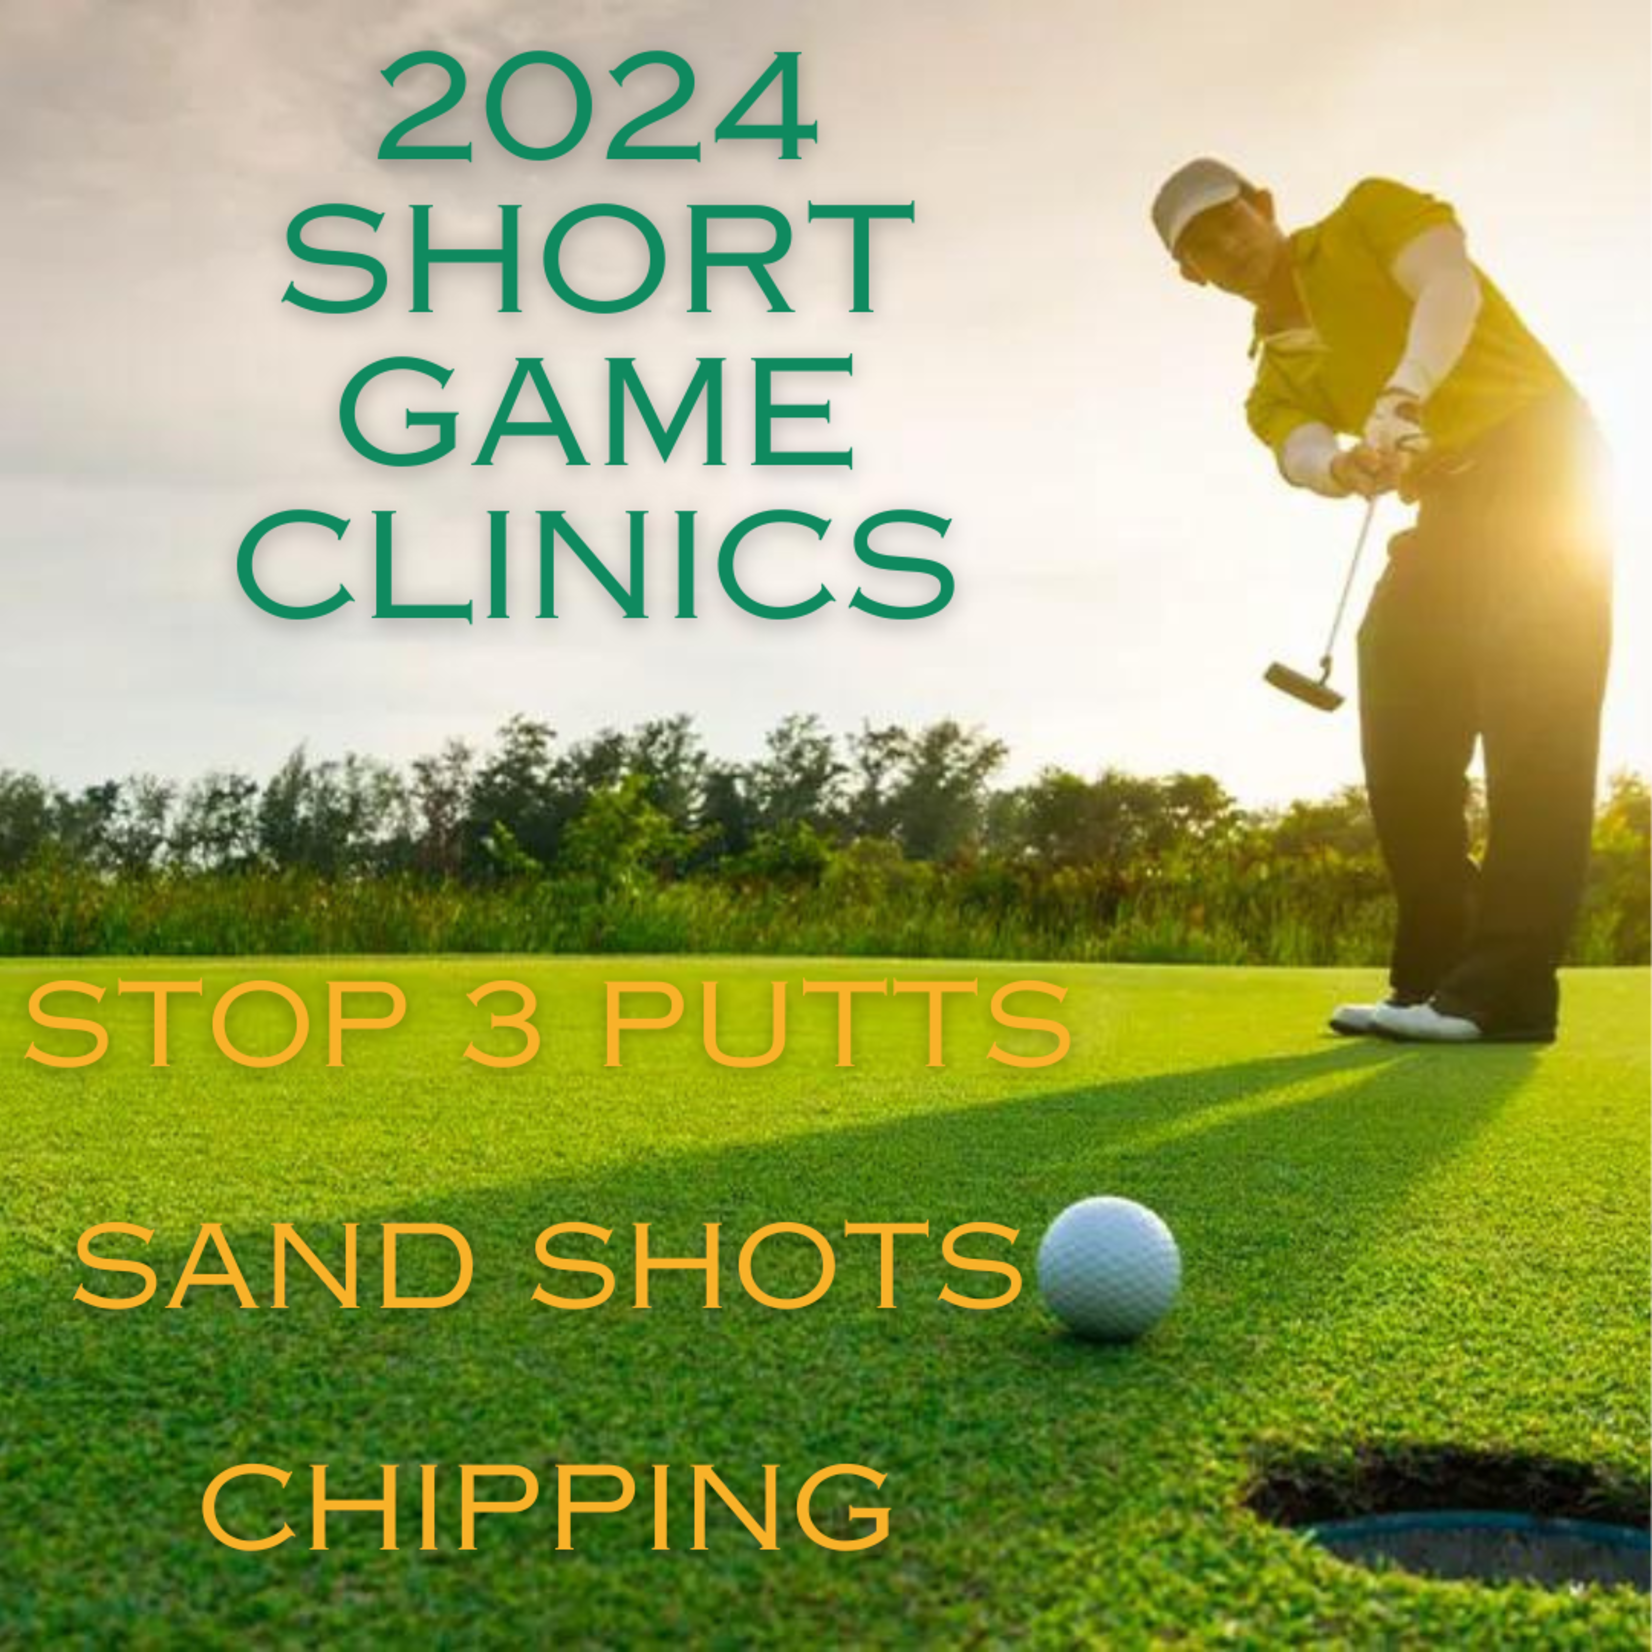 2024 Short Game Clinic #5 Saturday July 20th 11am-1pm